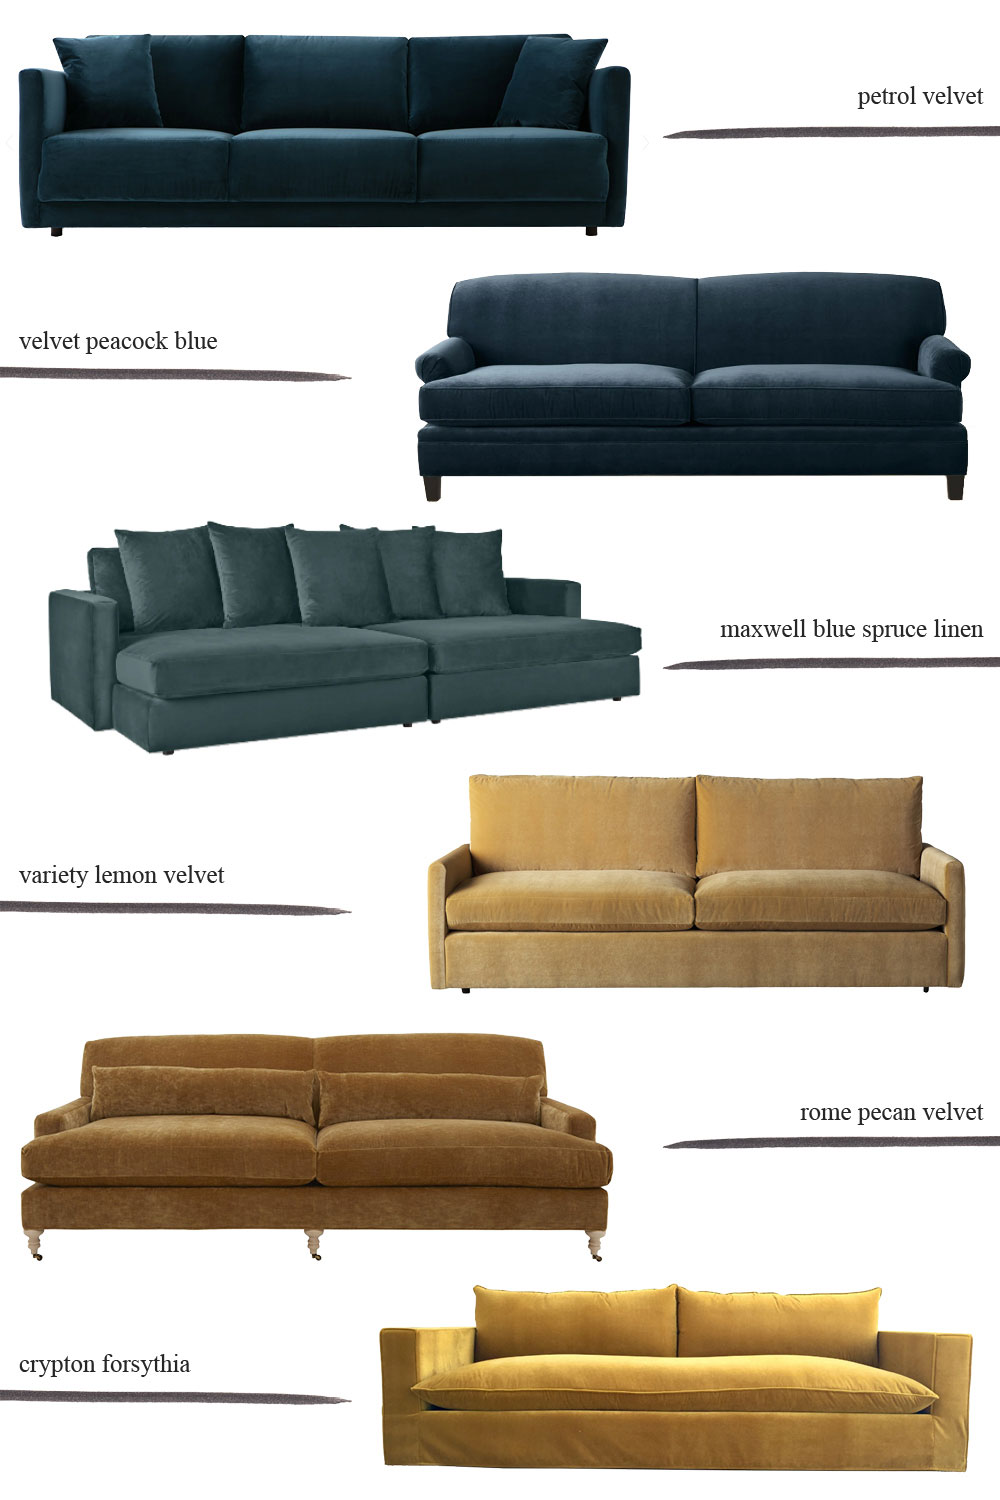 21 Beautiful Modern Sofas For The Living Room